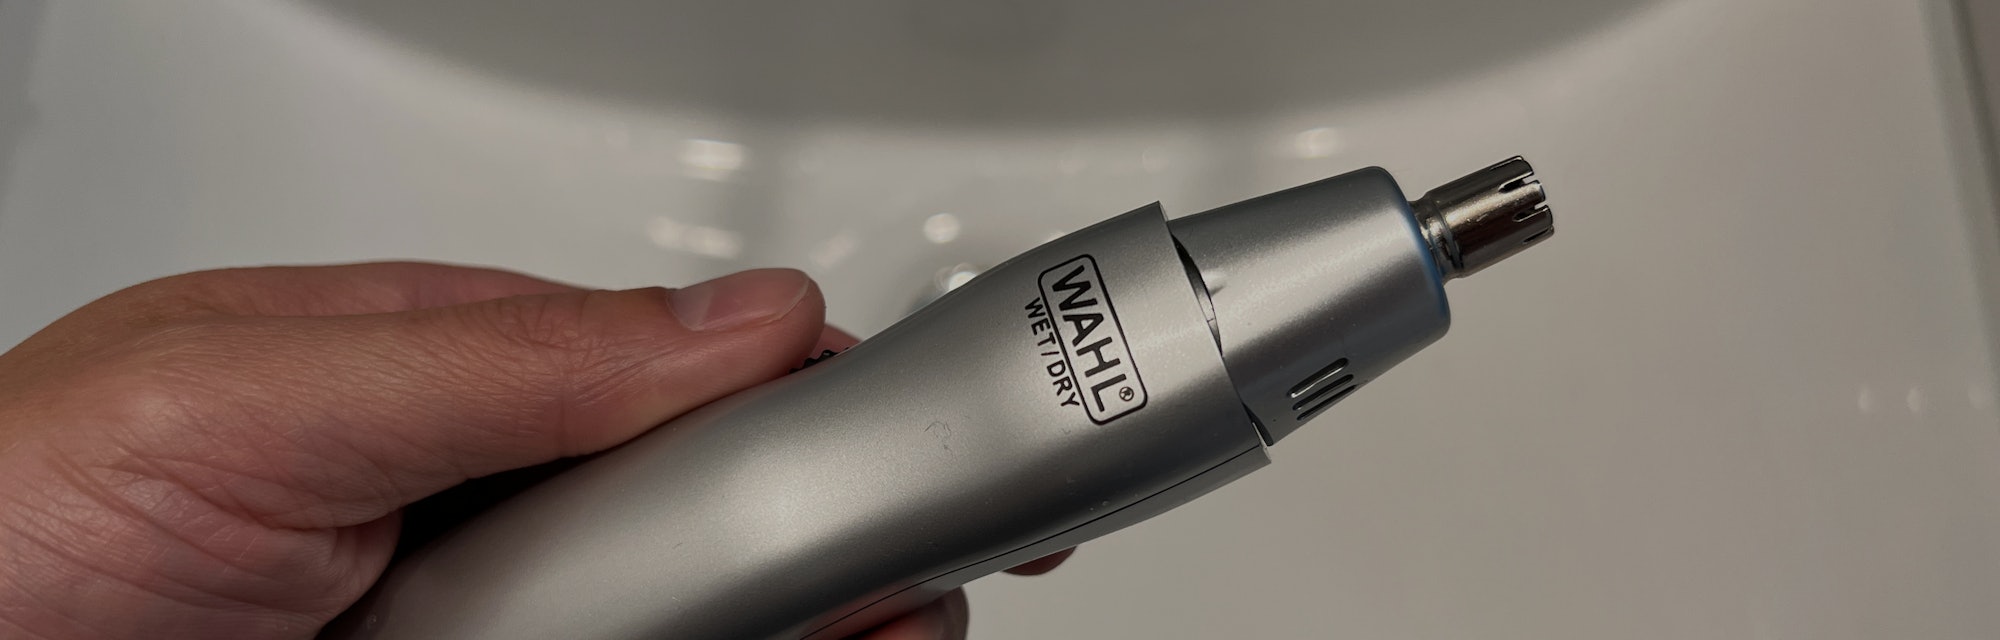 This $13 Wahl nose trimmer changed my life